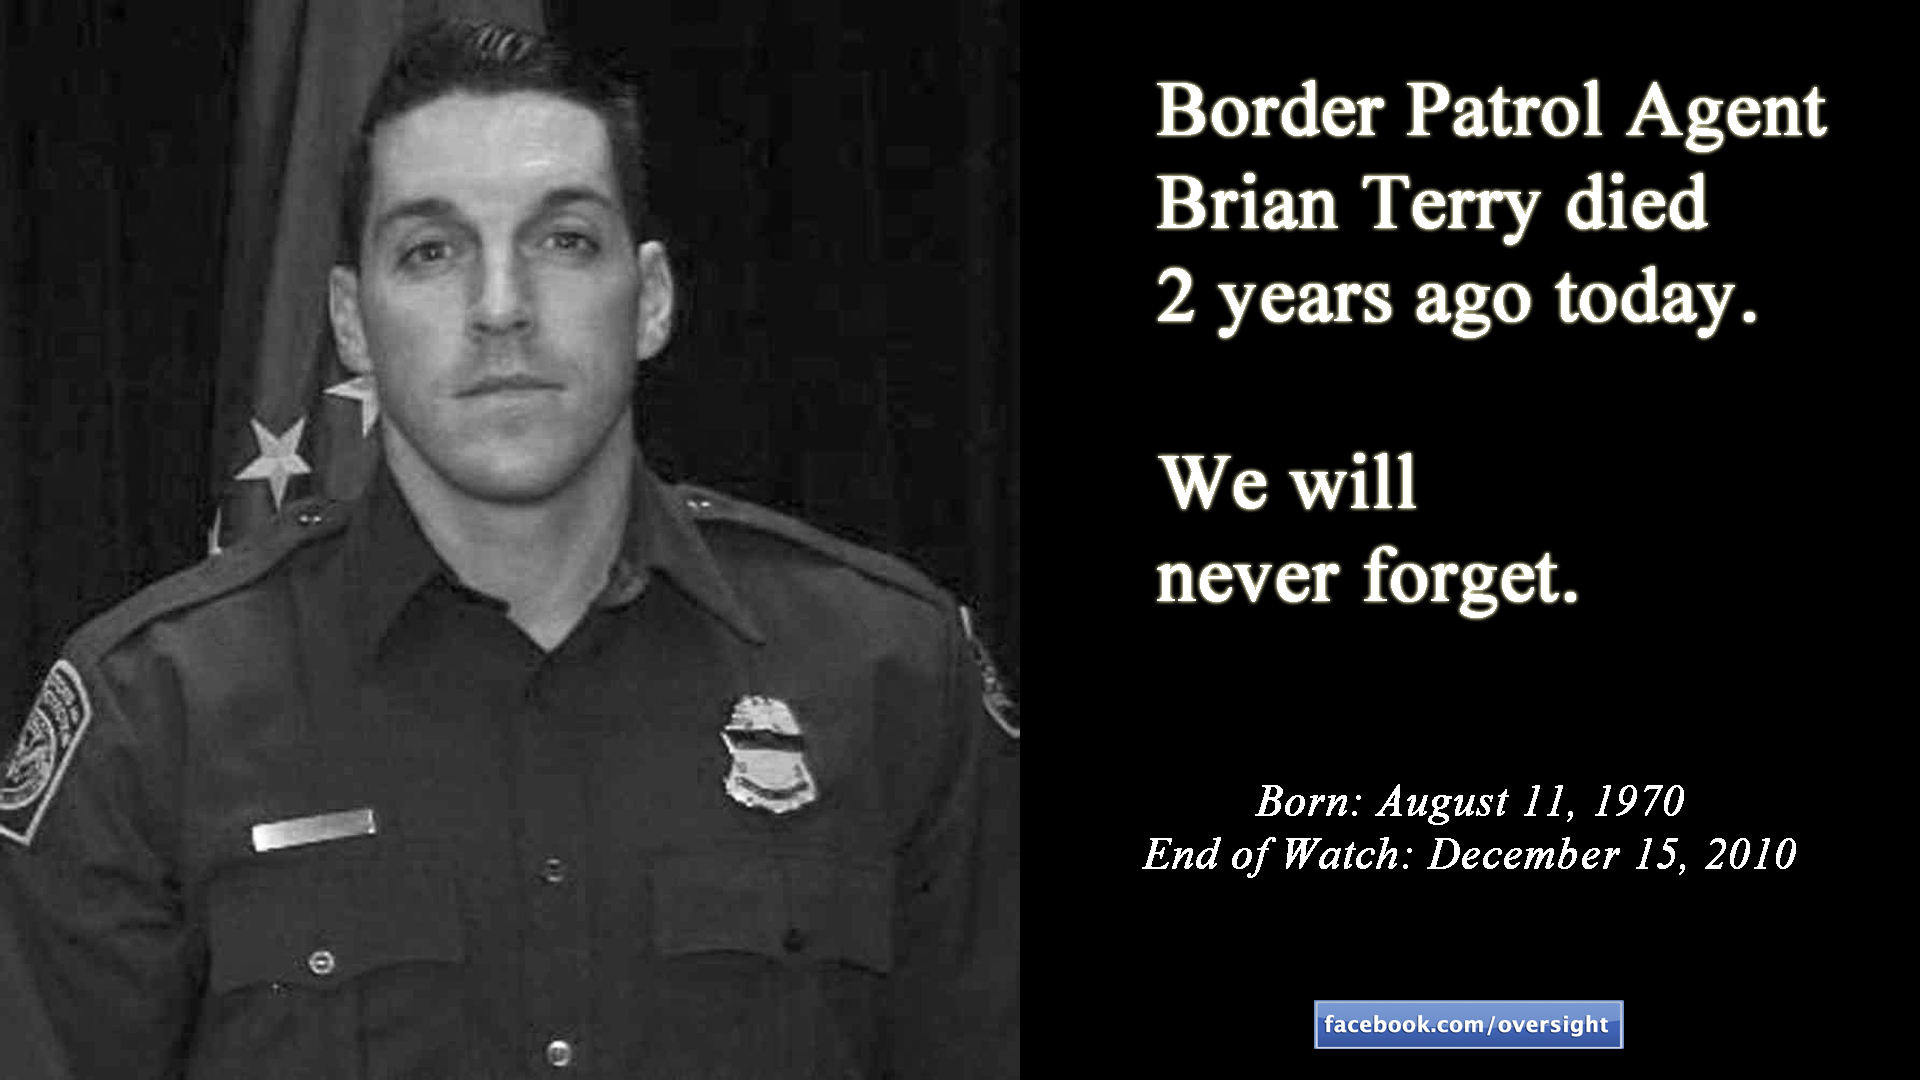 Honoring the Life of Fallen Border Patrol Agent Terry